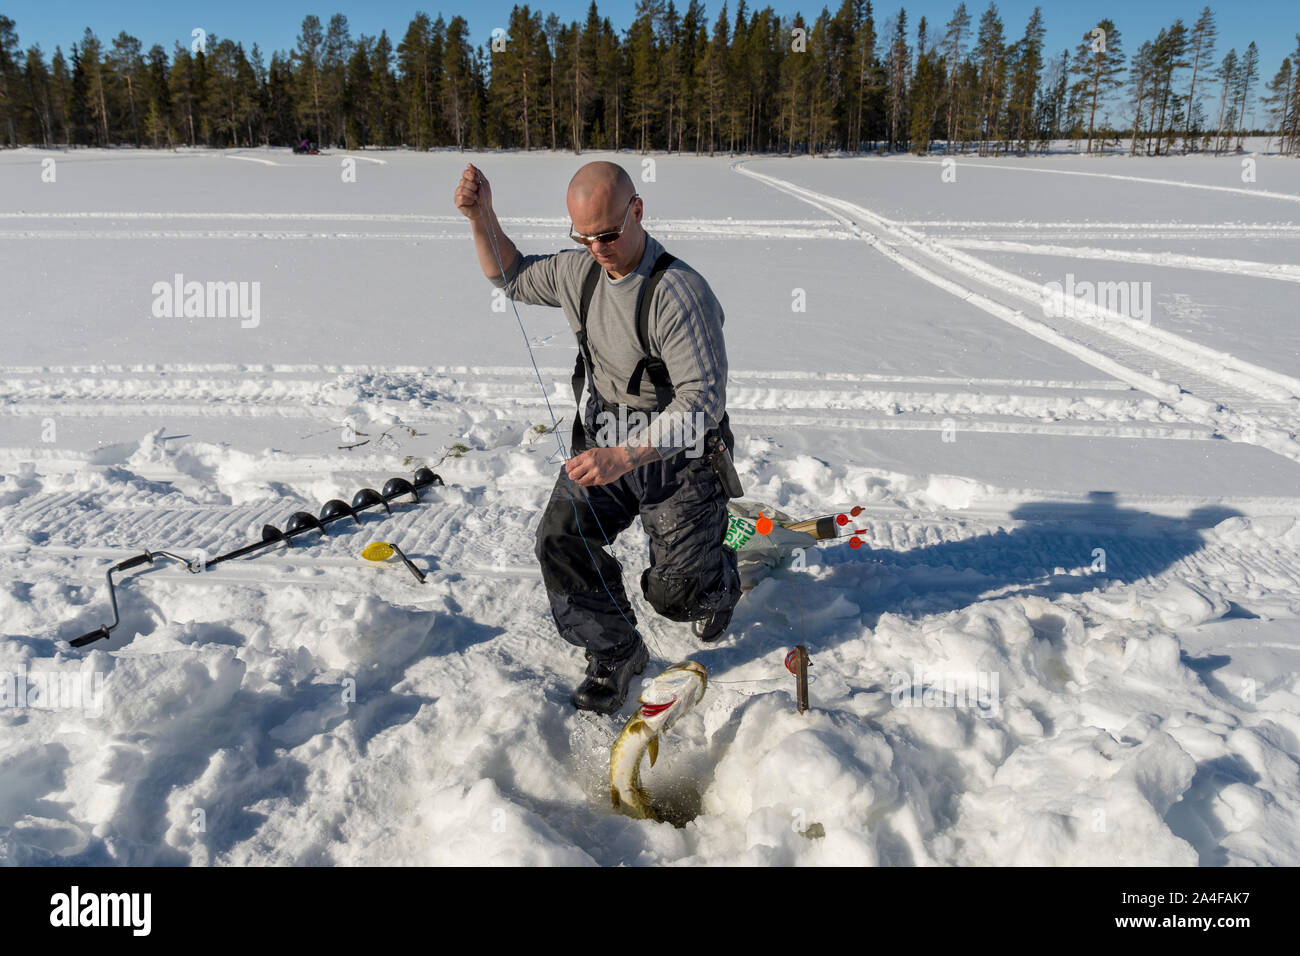 https://c8.alamy.com/comp/2A4FAK7/fishermen-catch-a-pike-with-a-special-winter-fishing-equipment-used-to-catch-pike-picture-from-the-nortern-sweden-2A4FAK7.jpg